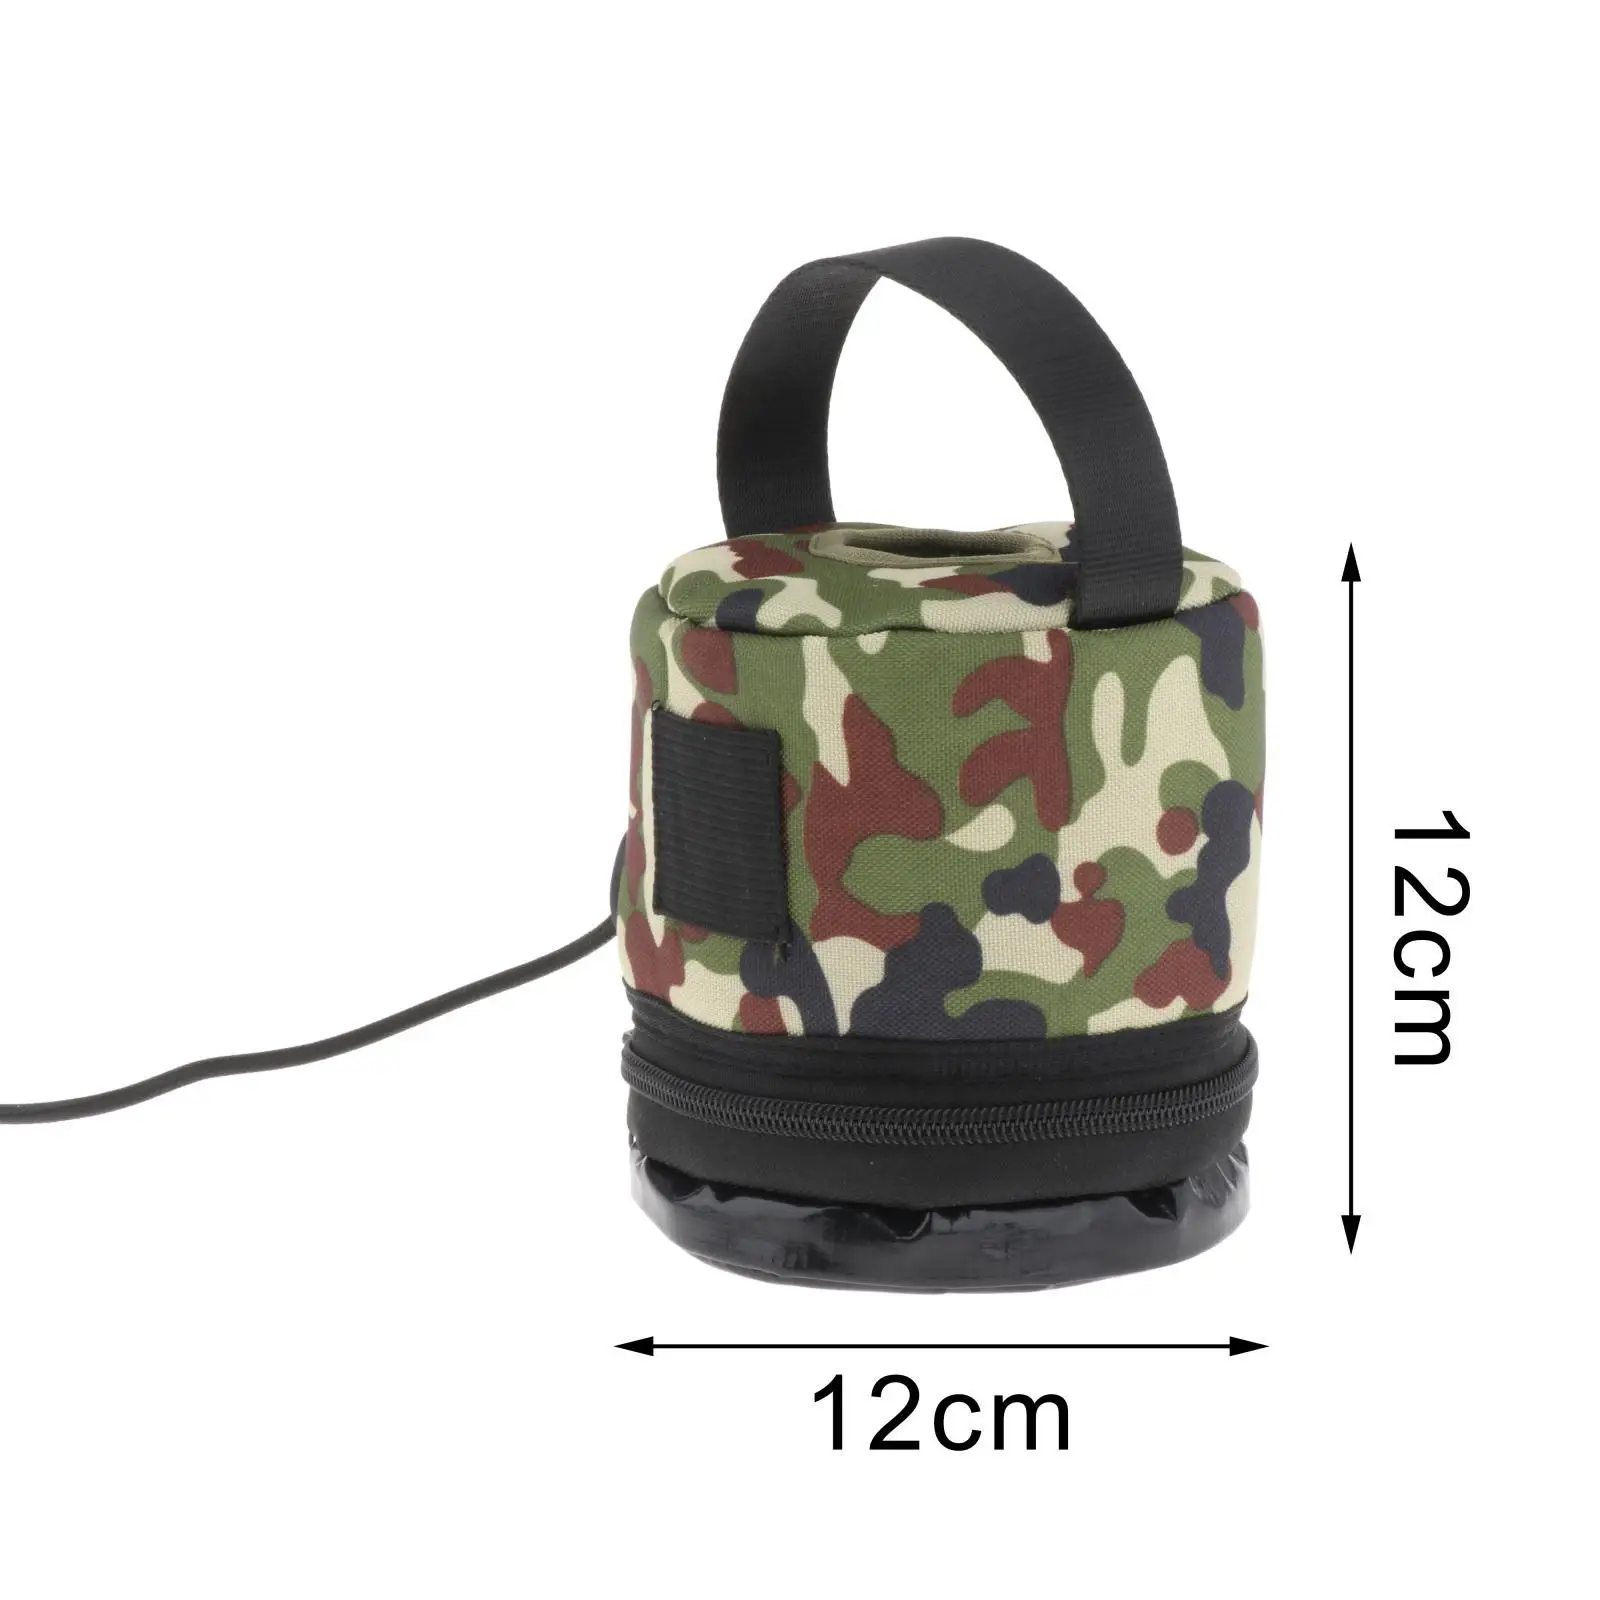 Camping Gas Canister Cover Storage Tissue Cover Portable with Handle Multipurpose Fuel Canister Protective Cover for Camping